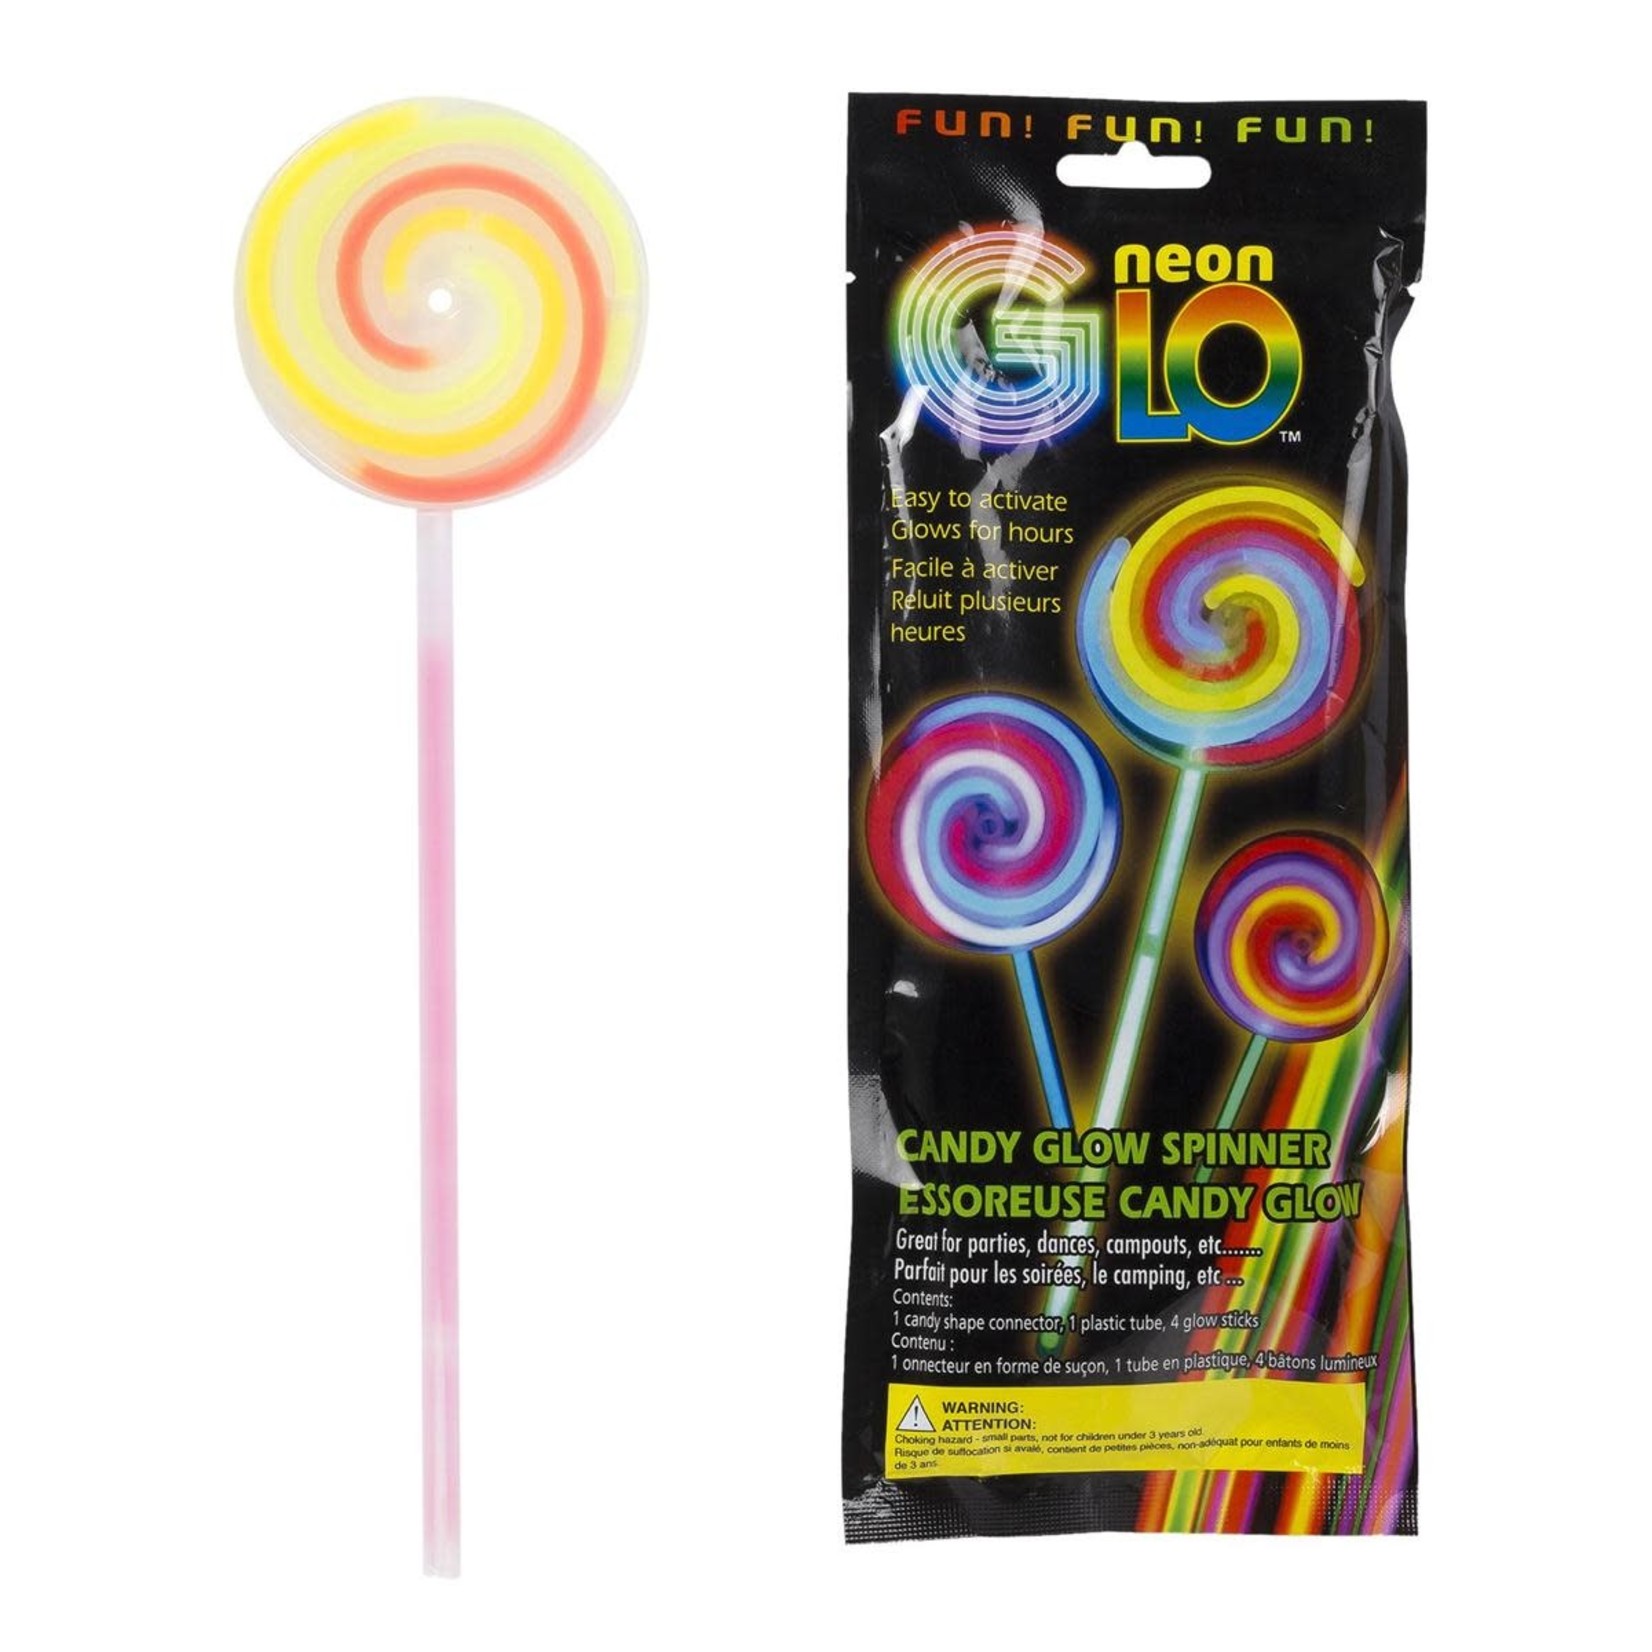 NEON GLOW CANDY GLOW SPINNER